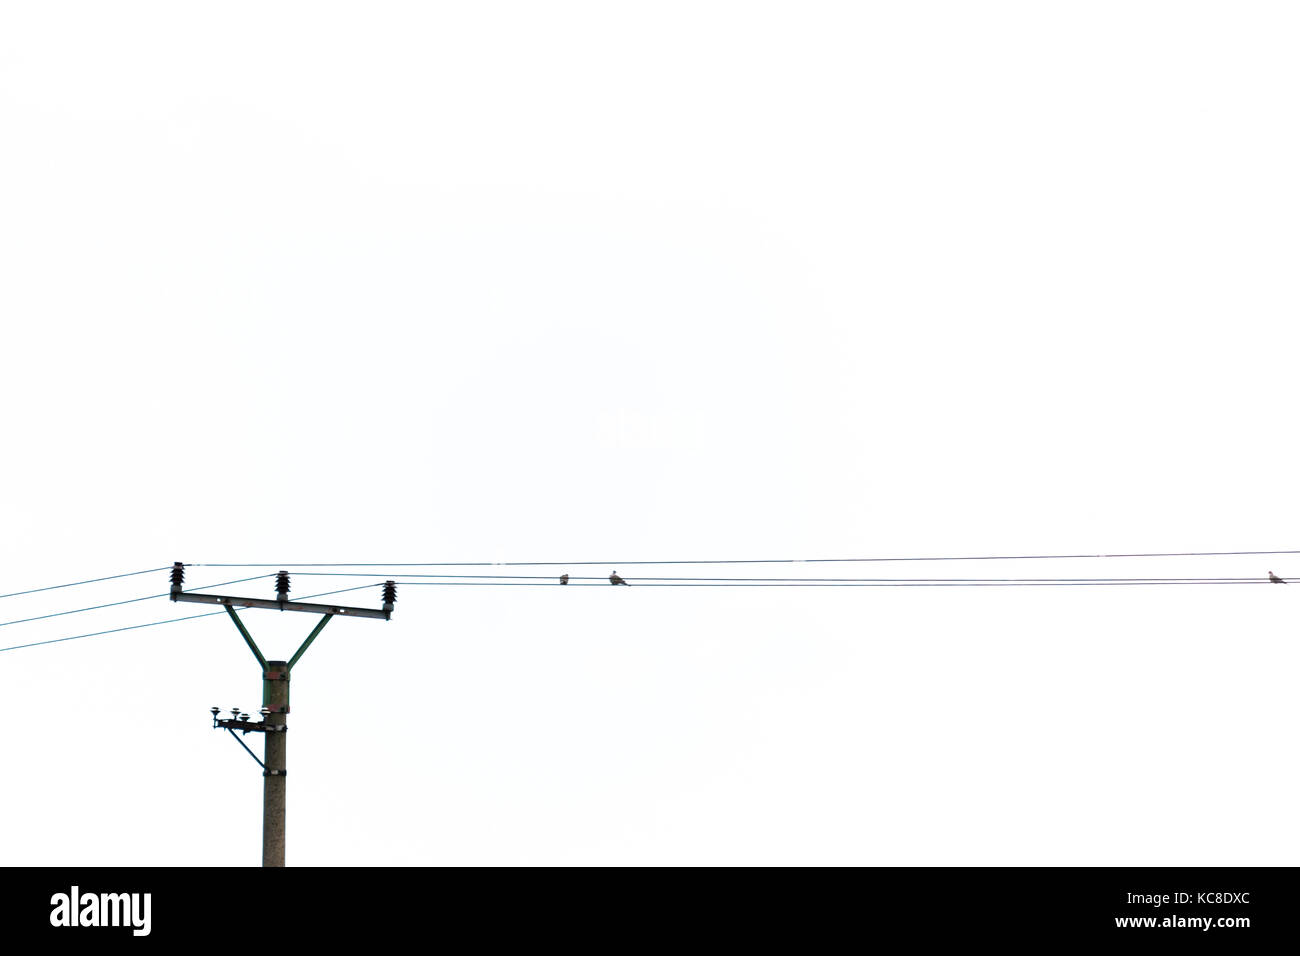 Some birds sitting on power lines. Grey sky on background. Stock Photo